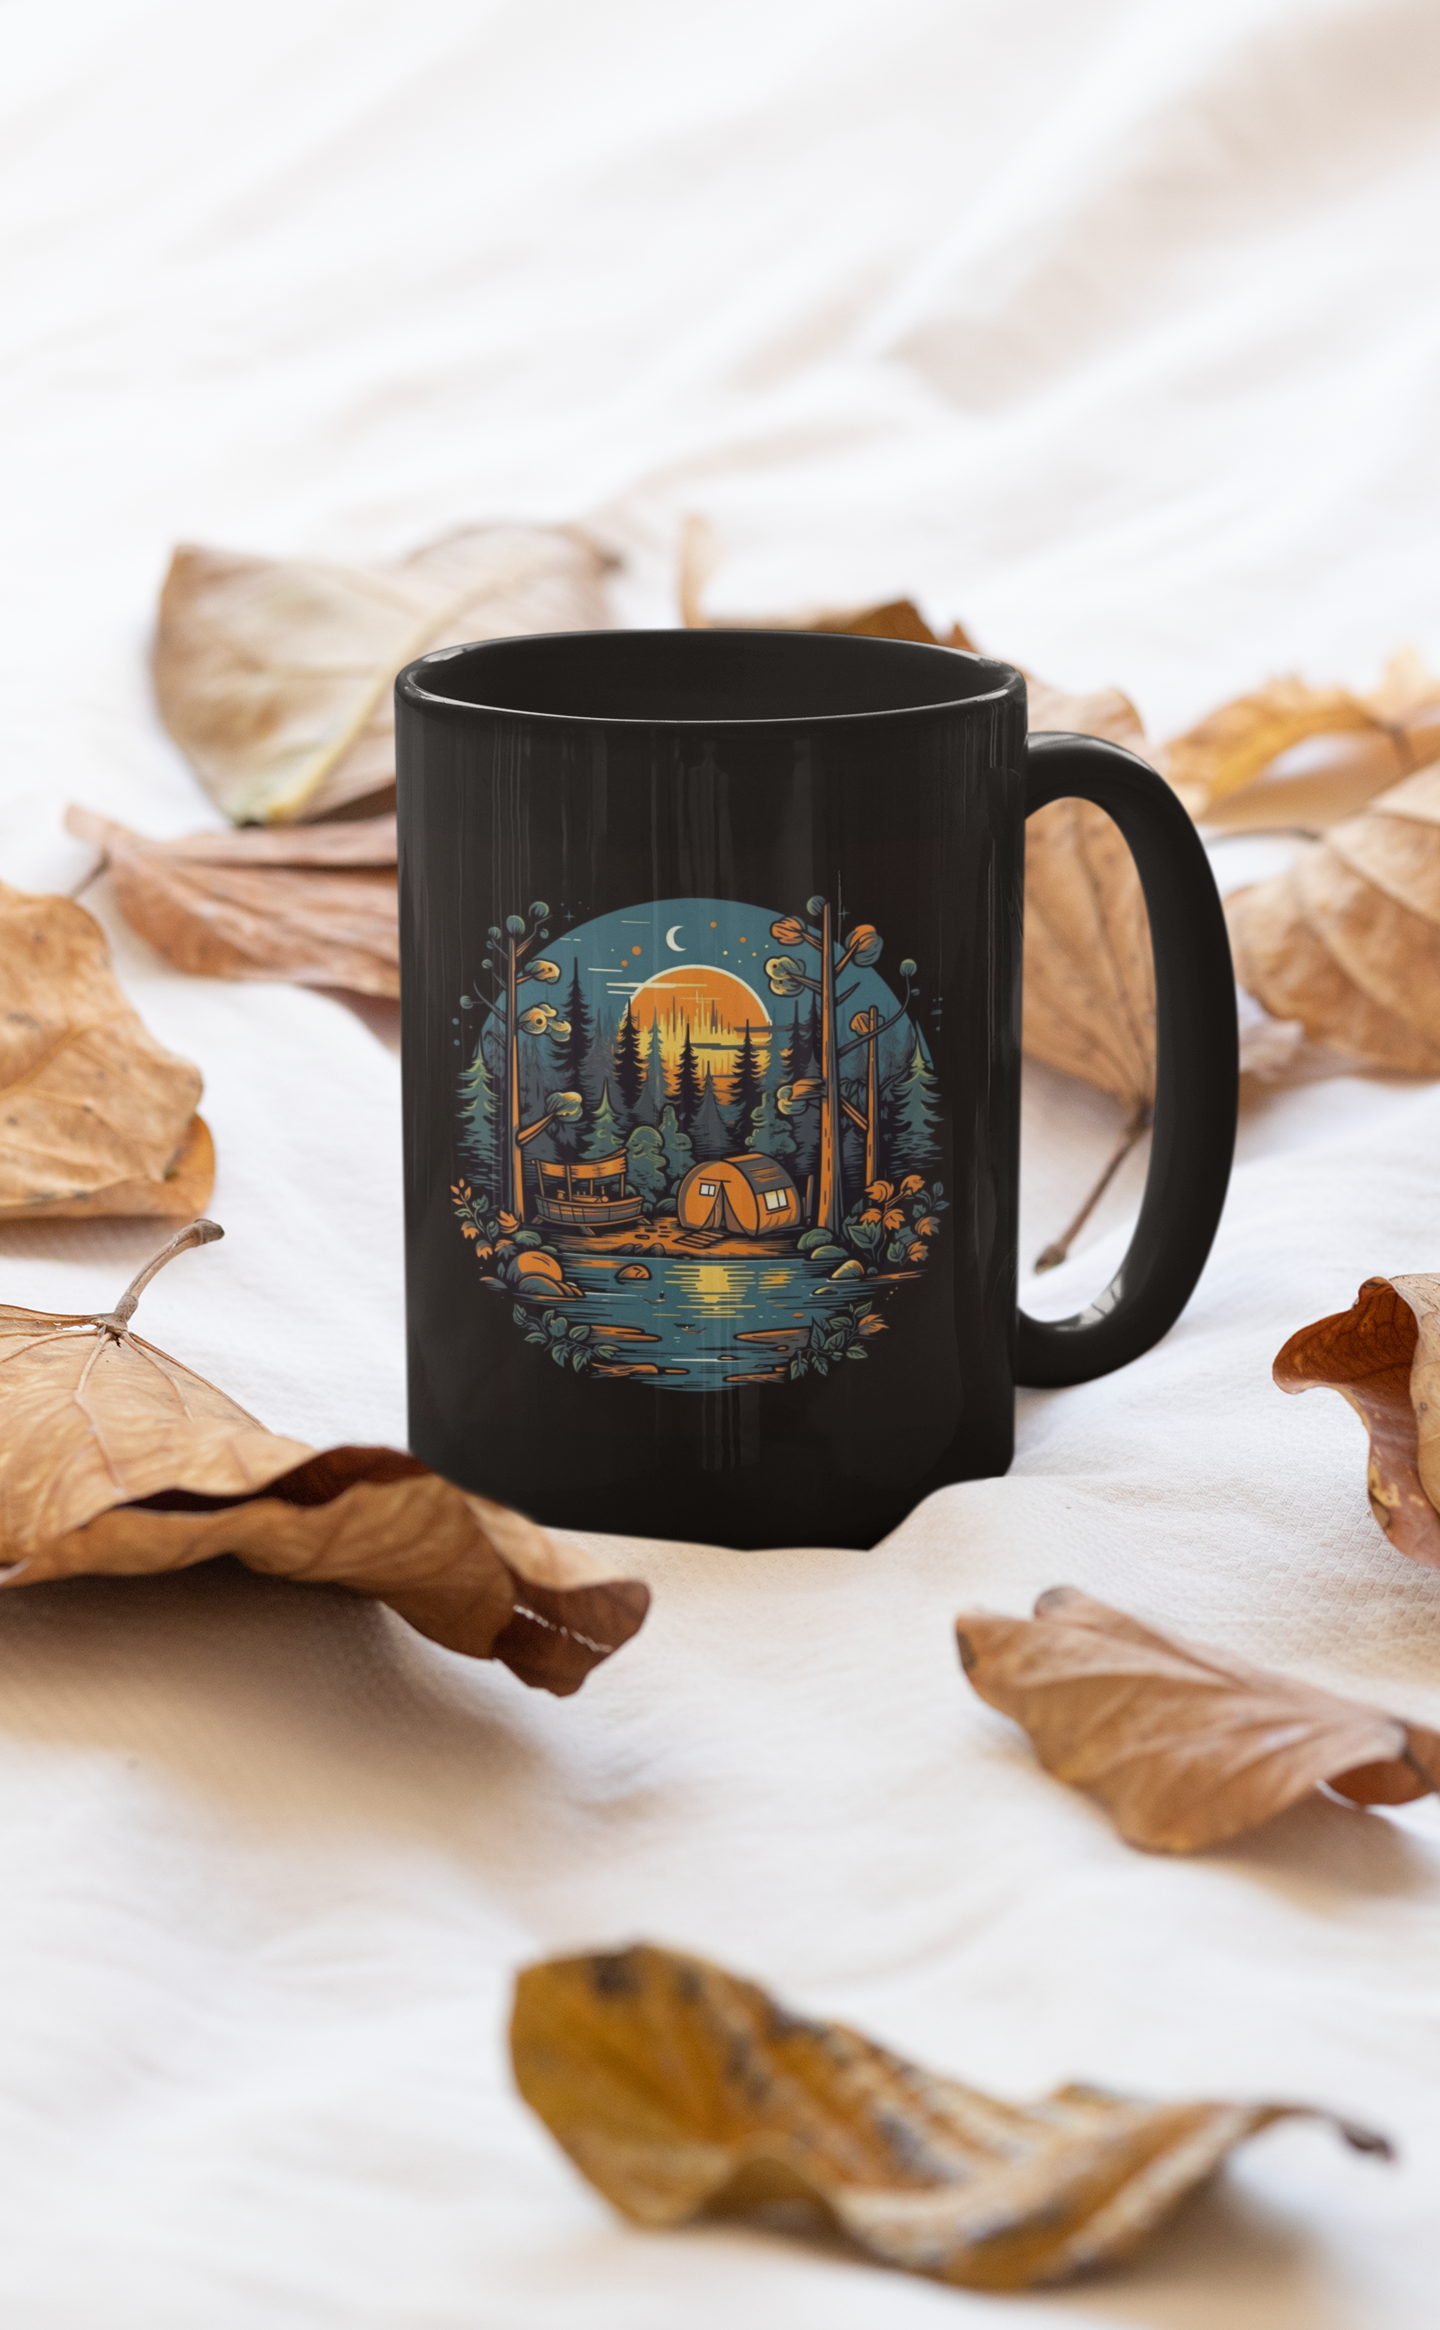 Camping Mug, Campfire Coffee Cup, Tent in Woods by Pond with Orange Moon Glow, Outdoors Gift, Ceramic Mug 15oz, Beauty of Nature Tea Cup